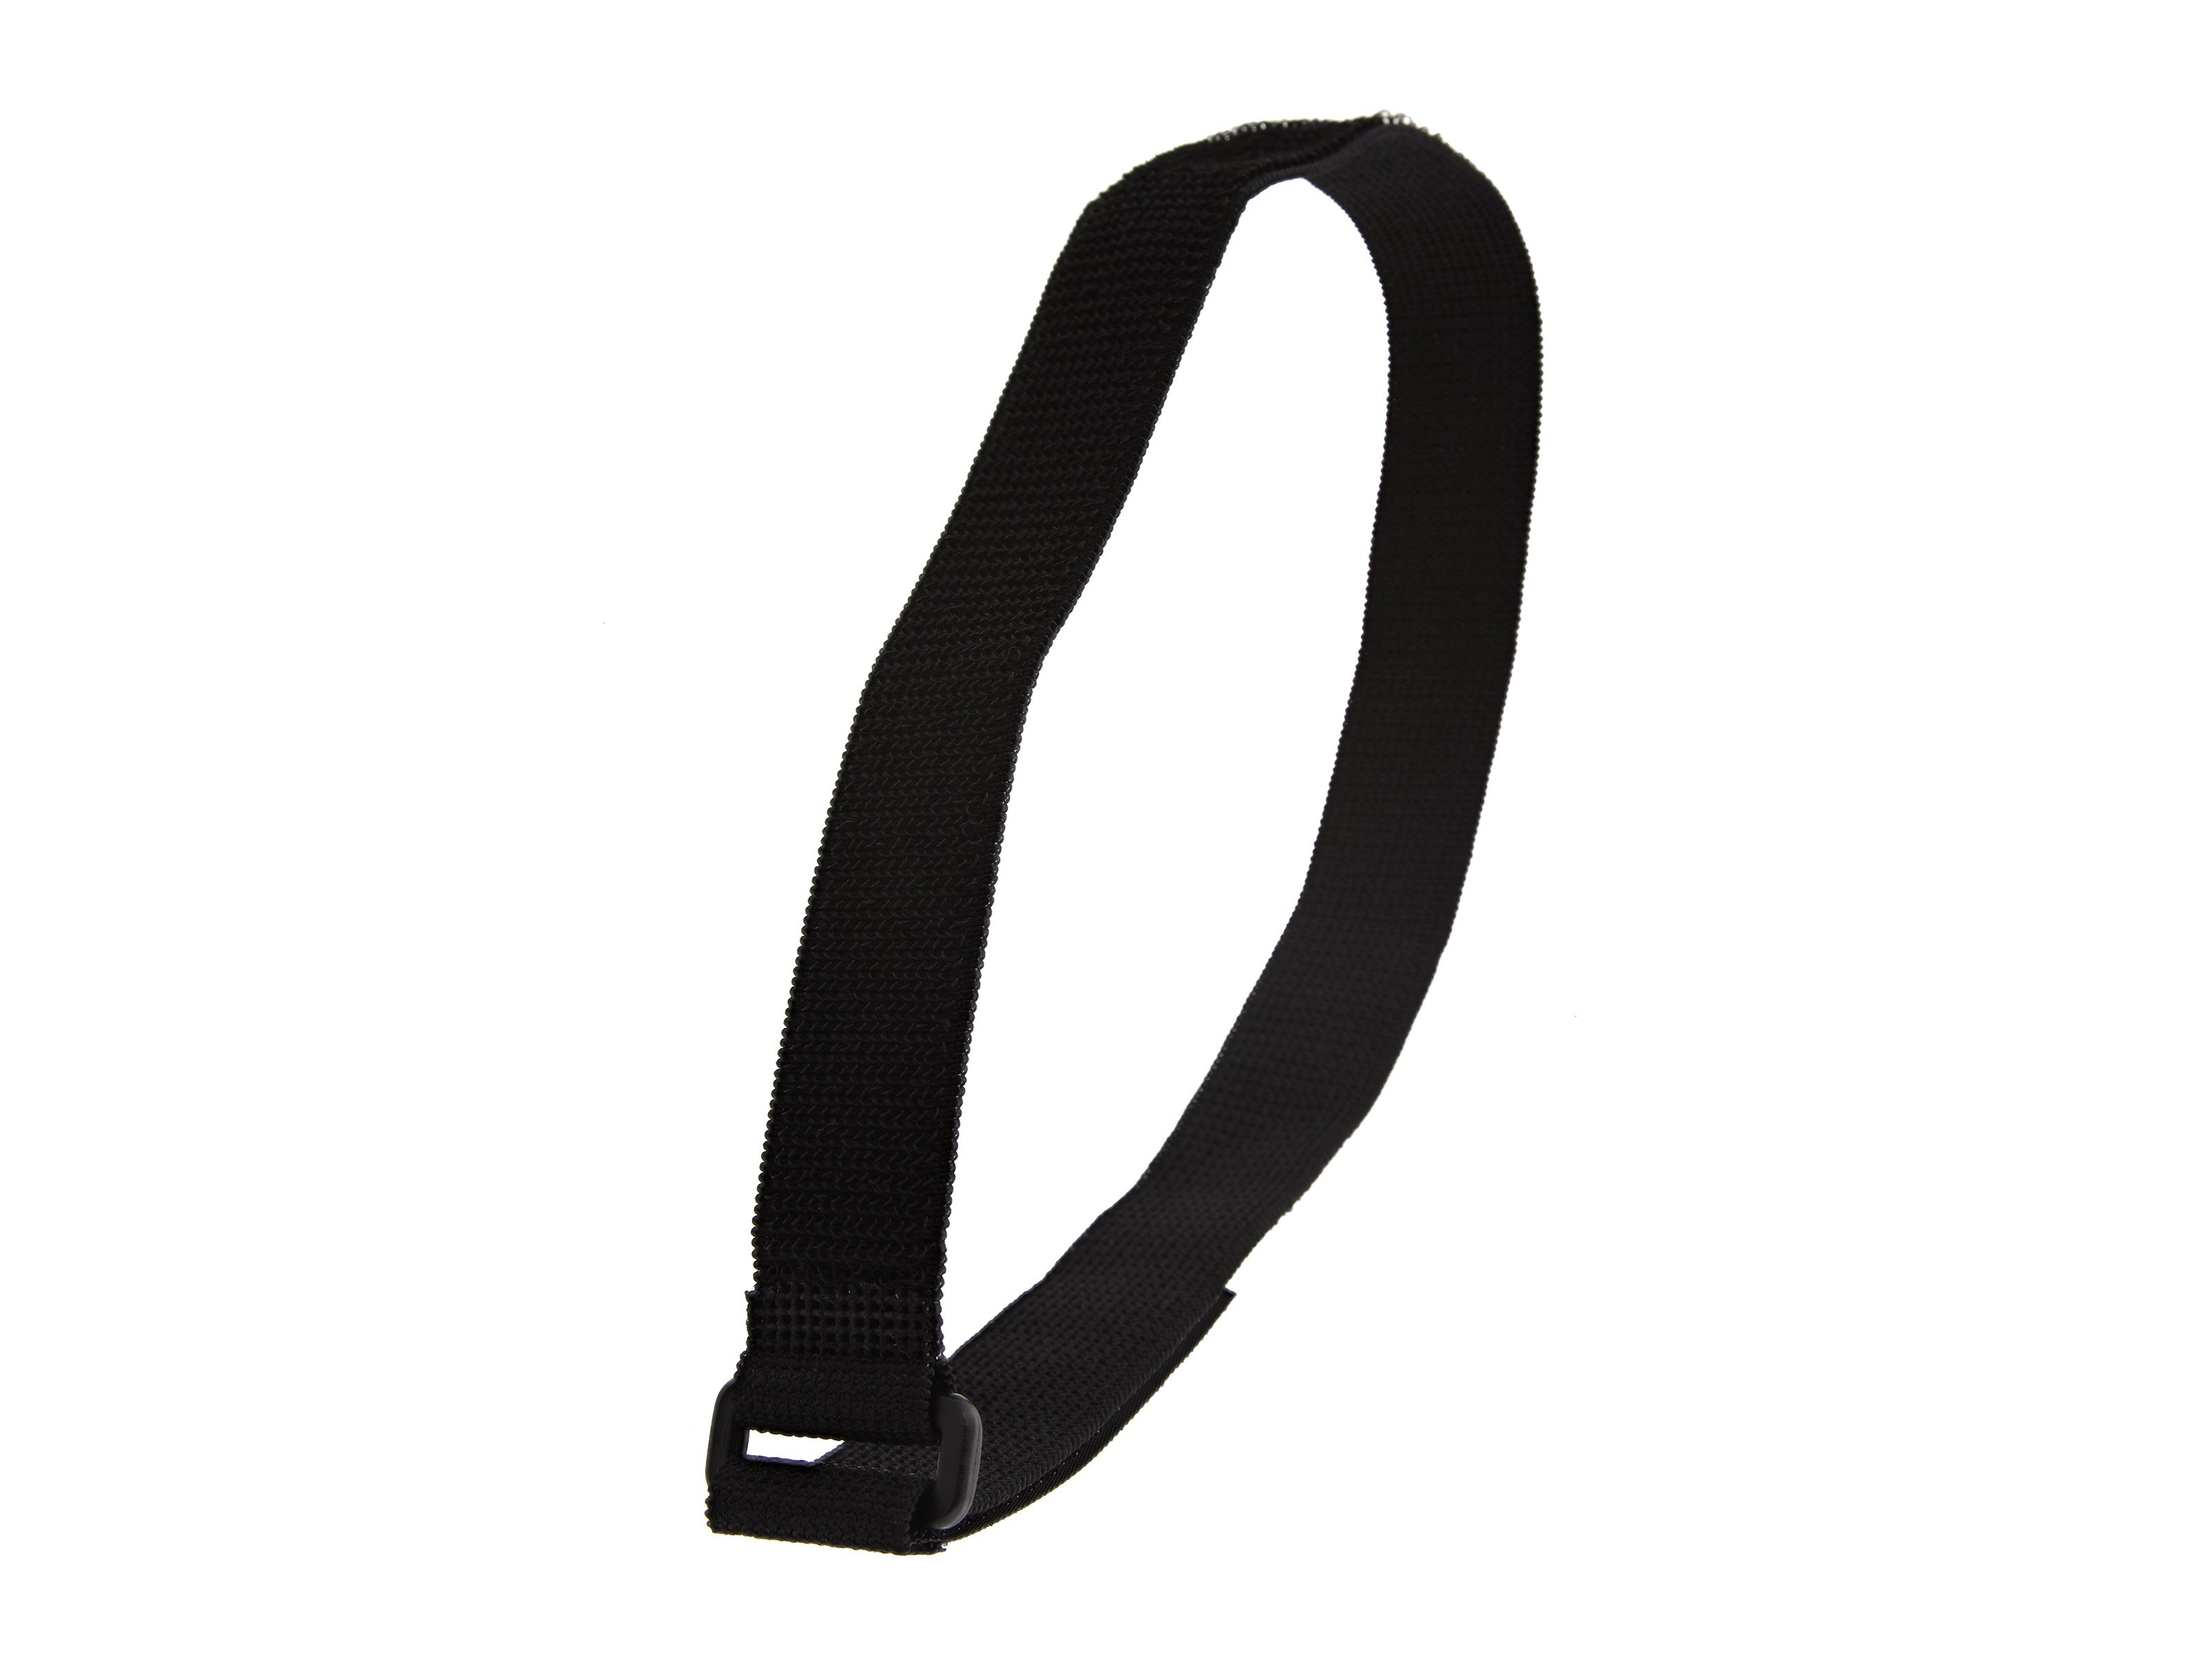 Secure Cable Ties 24 x 3 inch Heavy Duty Black Cinch Strap - 5 Pack